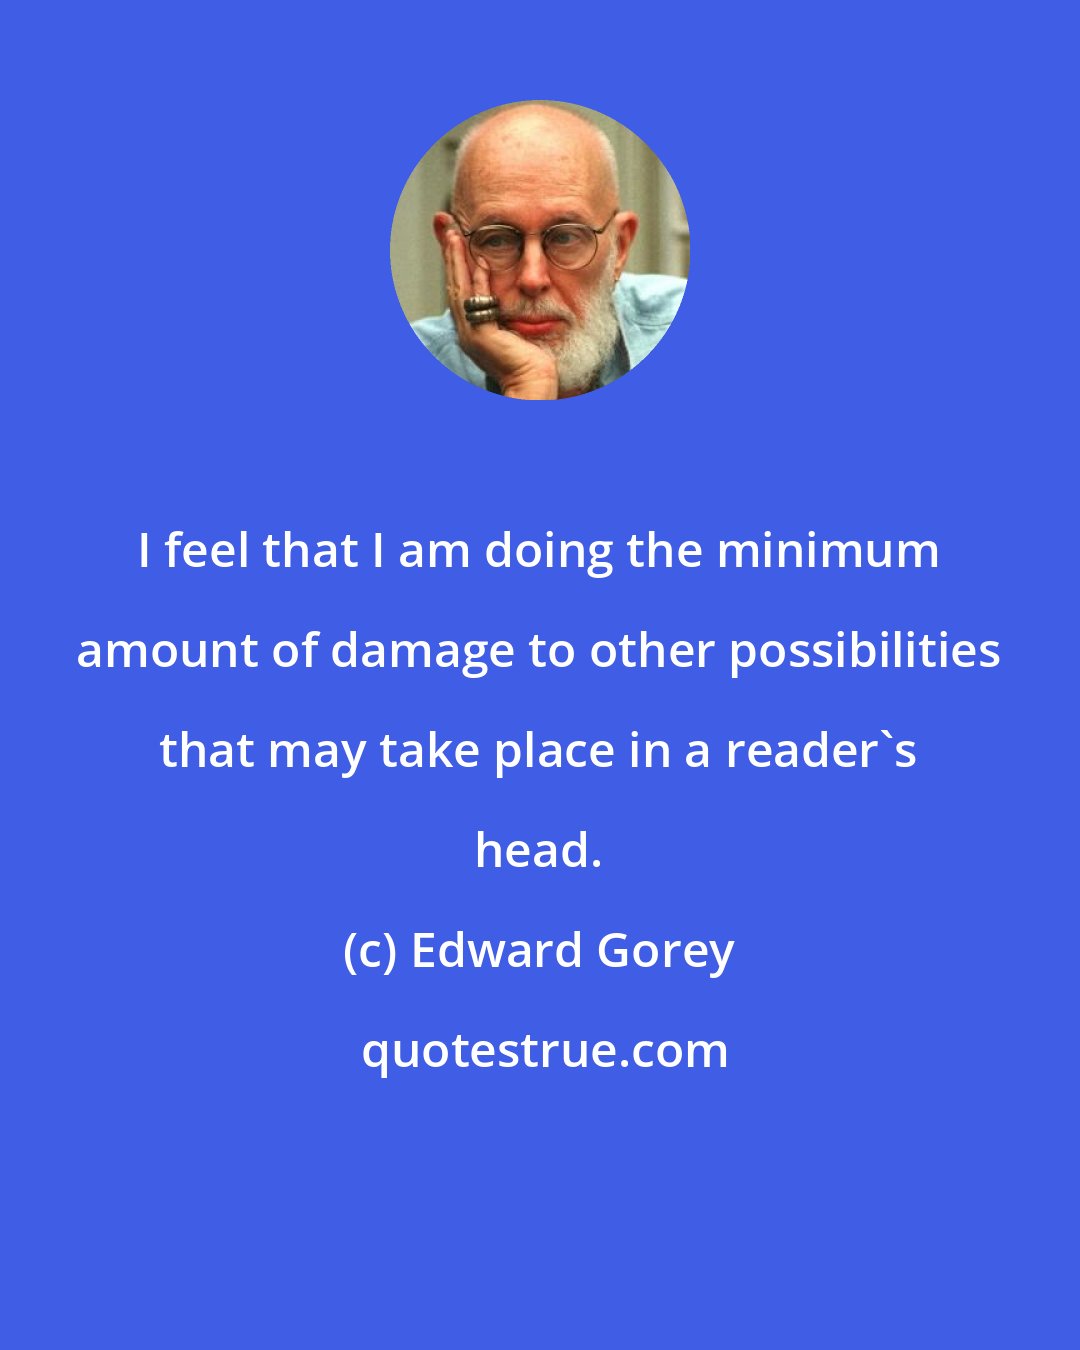 Edward Gorey: I feel that I am doing the minimum amount of damage to other possibilities that may take place in a reader's head.